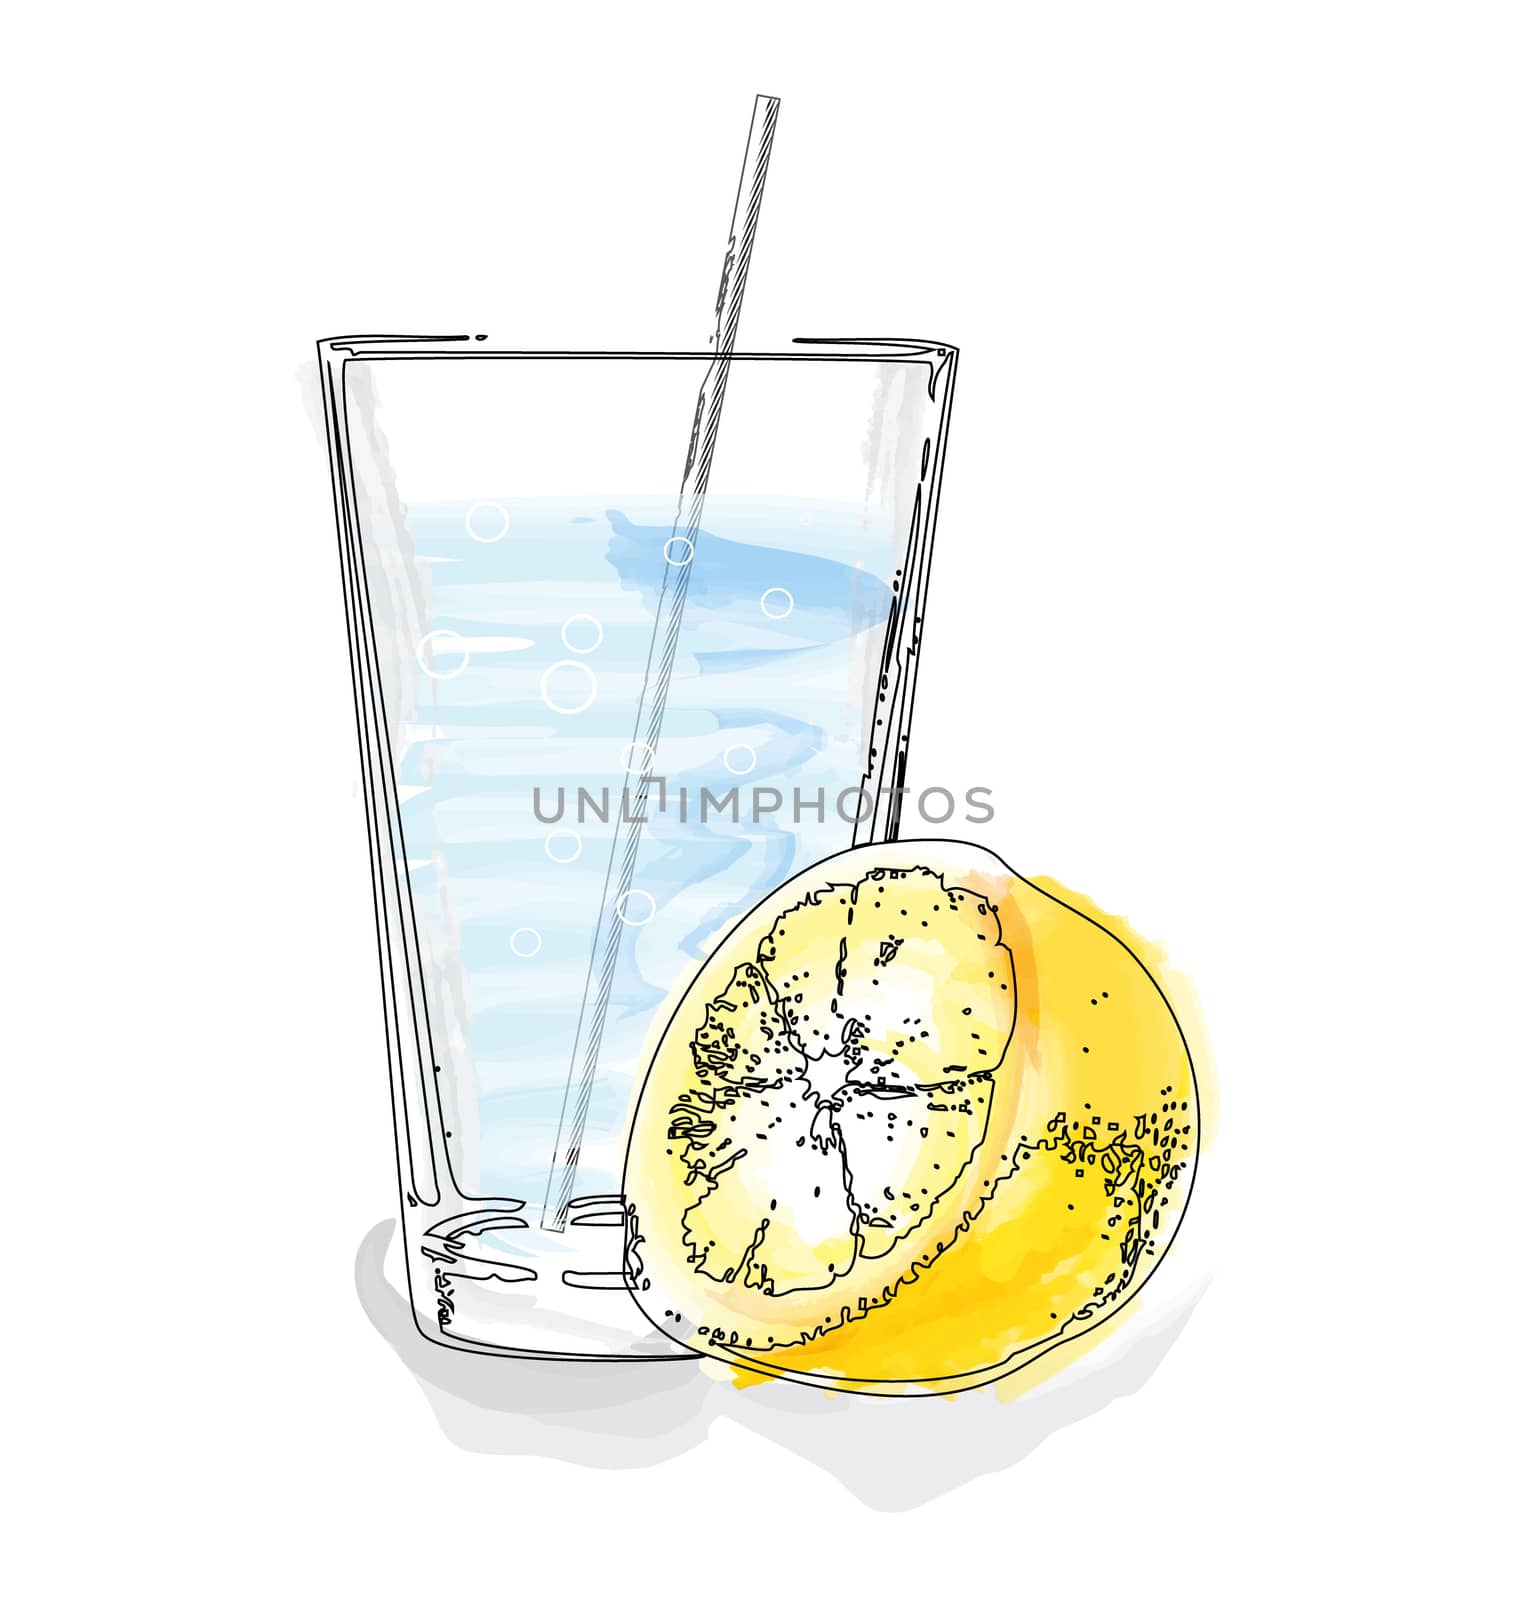 Colorful retro illustration of glass and lemon half in watercolor style